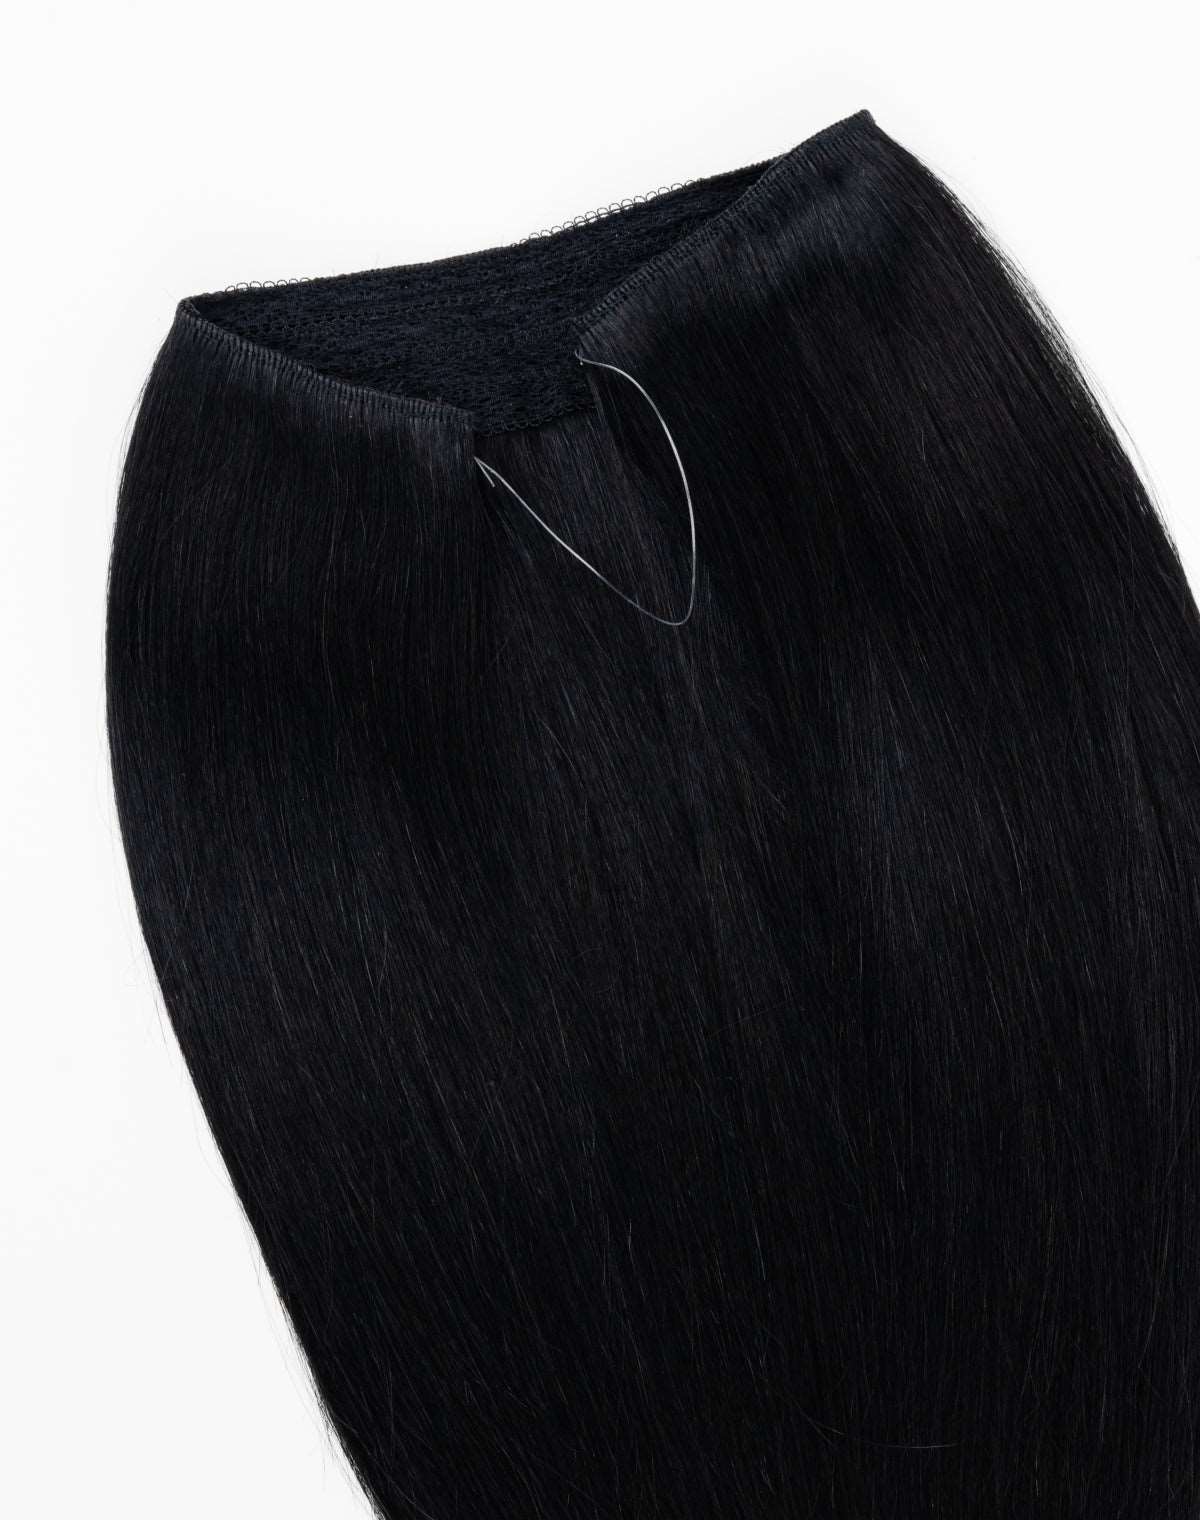 16 Deluxe Halo Jet Black #1 Hair Extensions